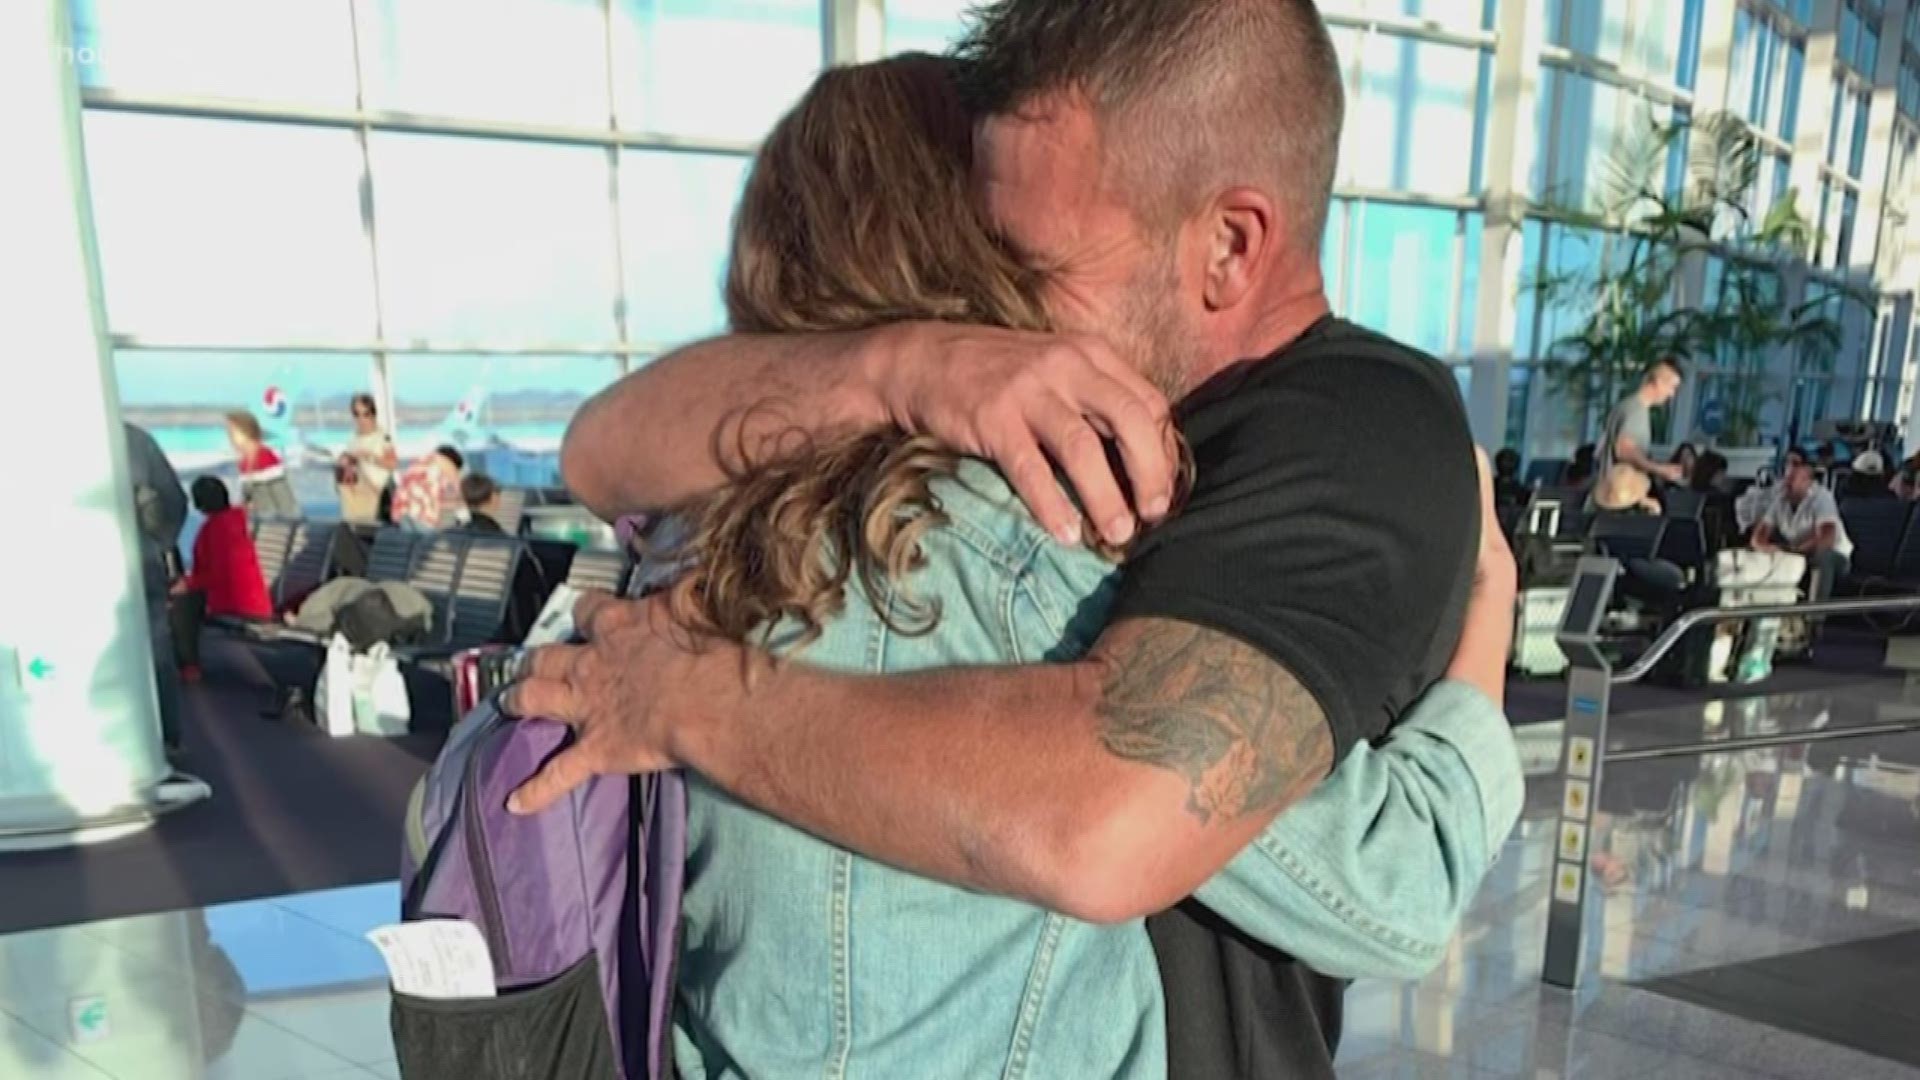 A Houston-area Navy veteran is reunited with his family after spending 13 months in prison in Thailand for a crime he didn't commit.